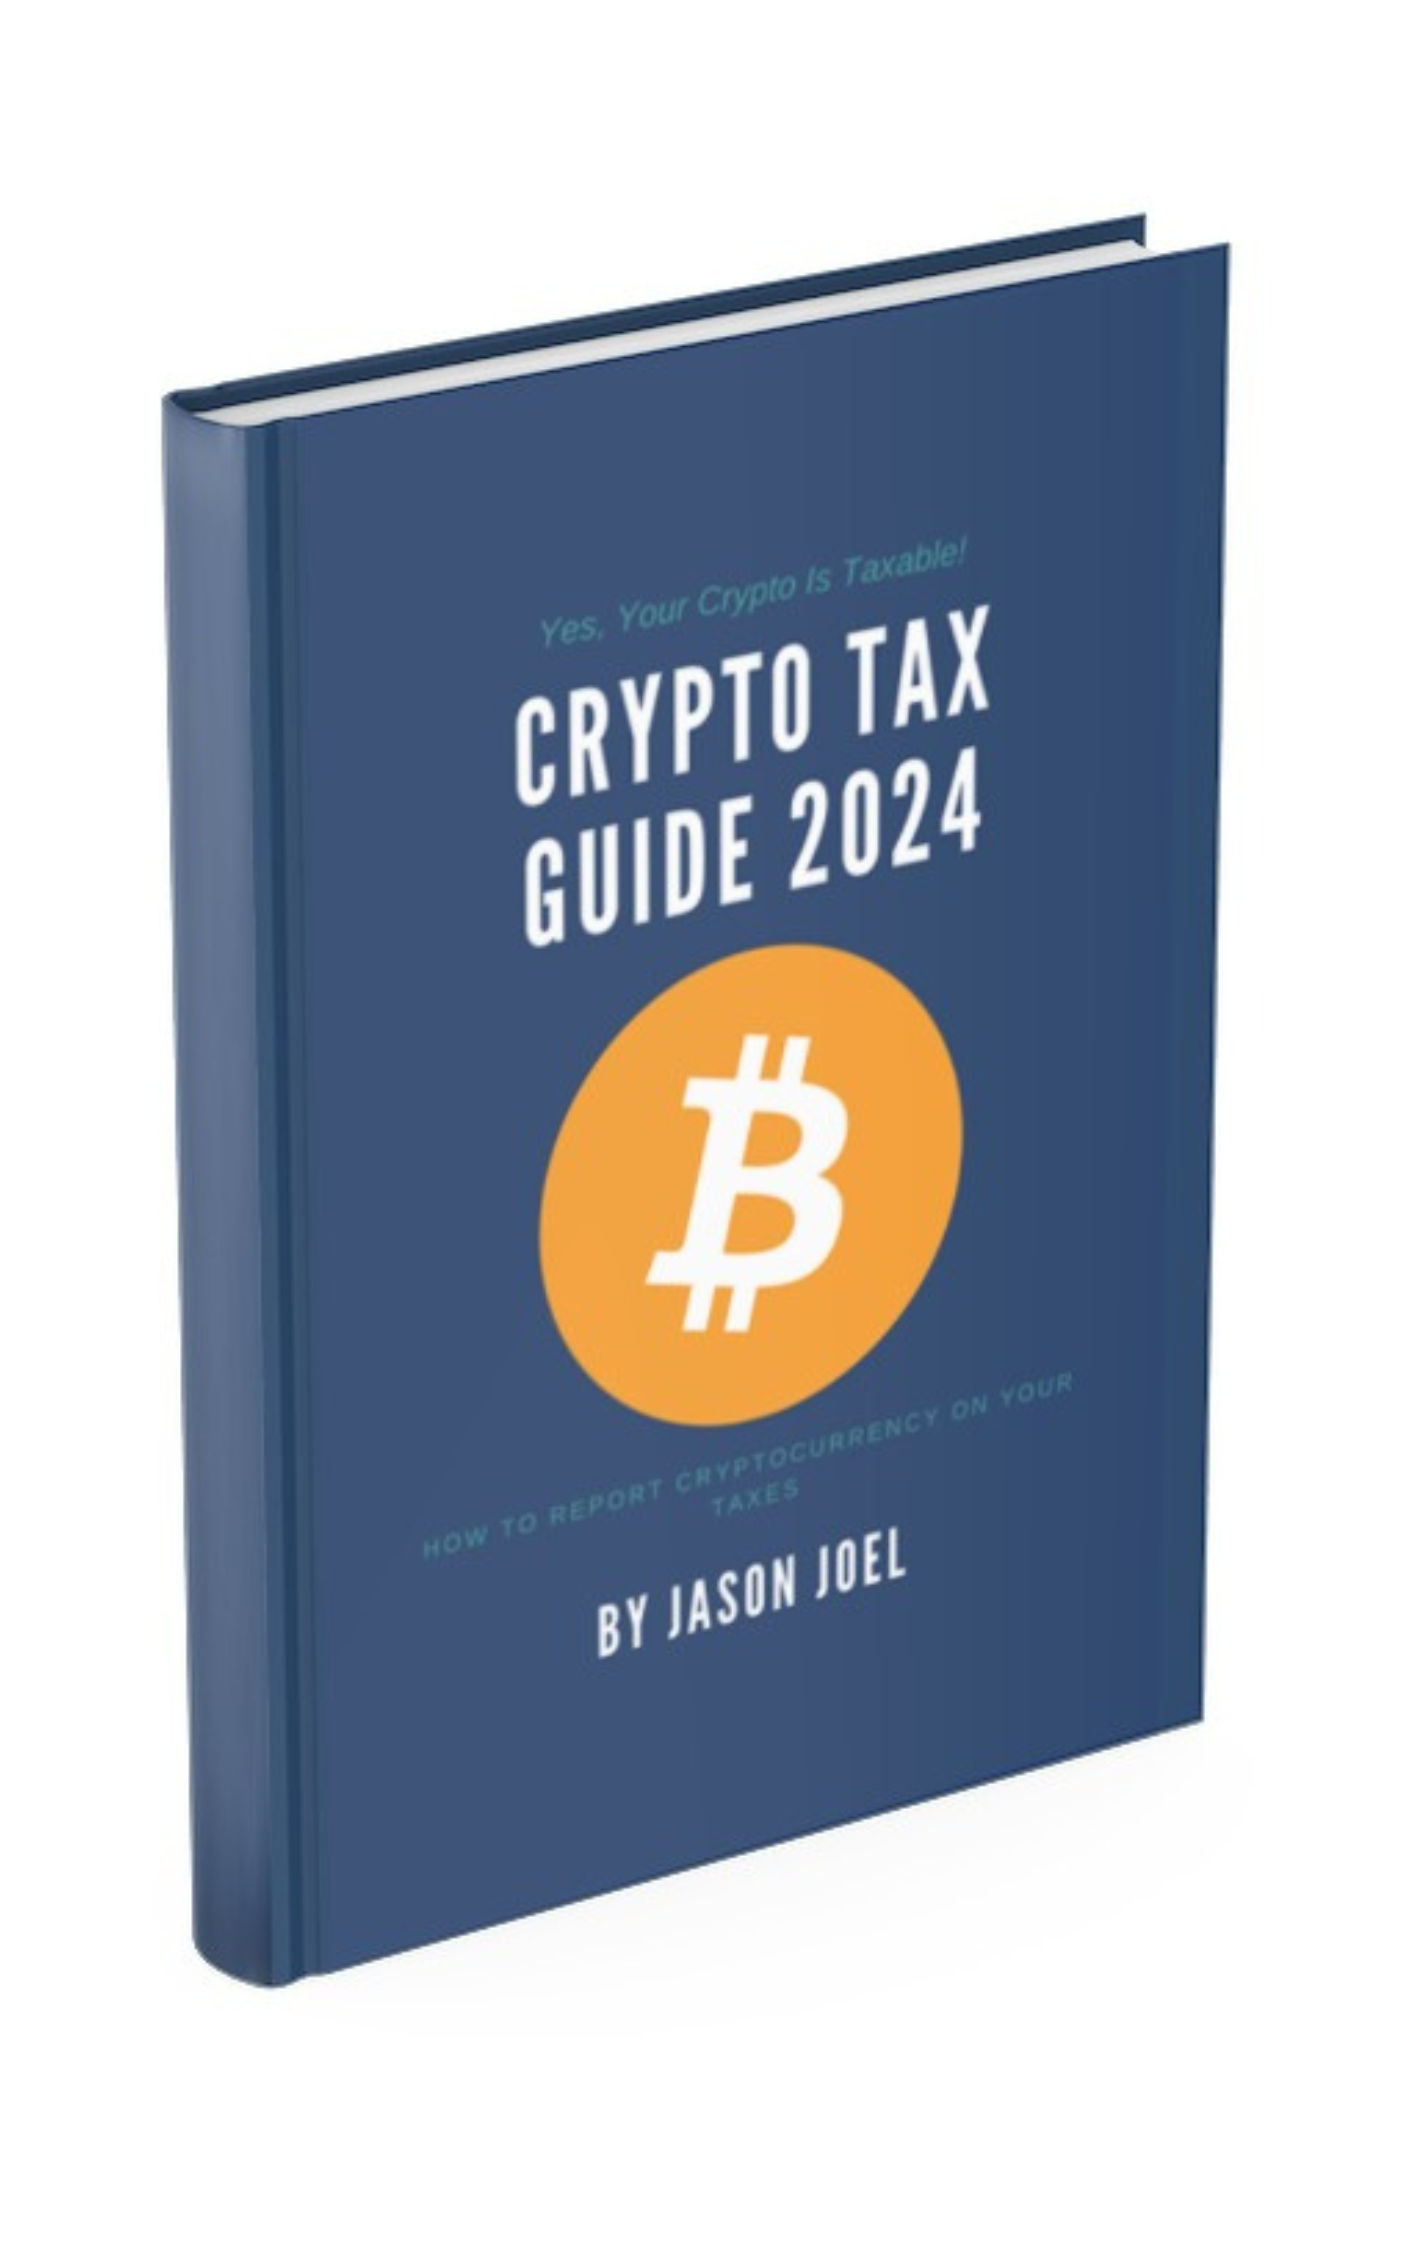 Download your free Crypto Tax Guide!